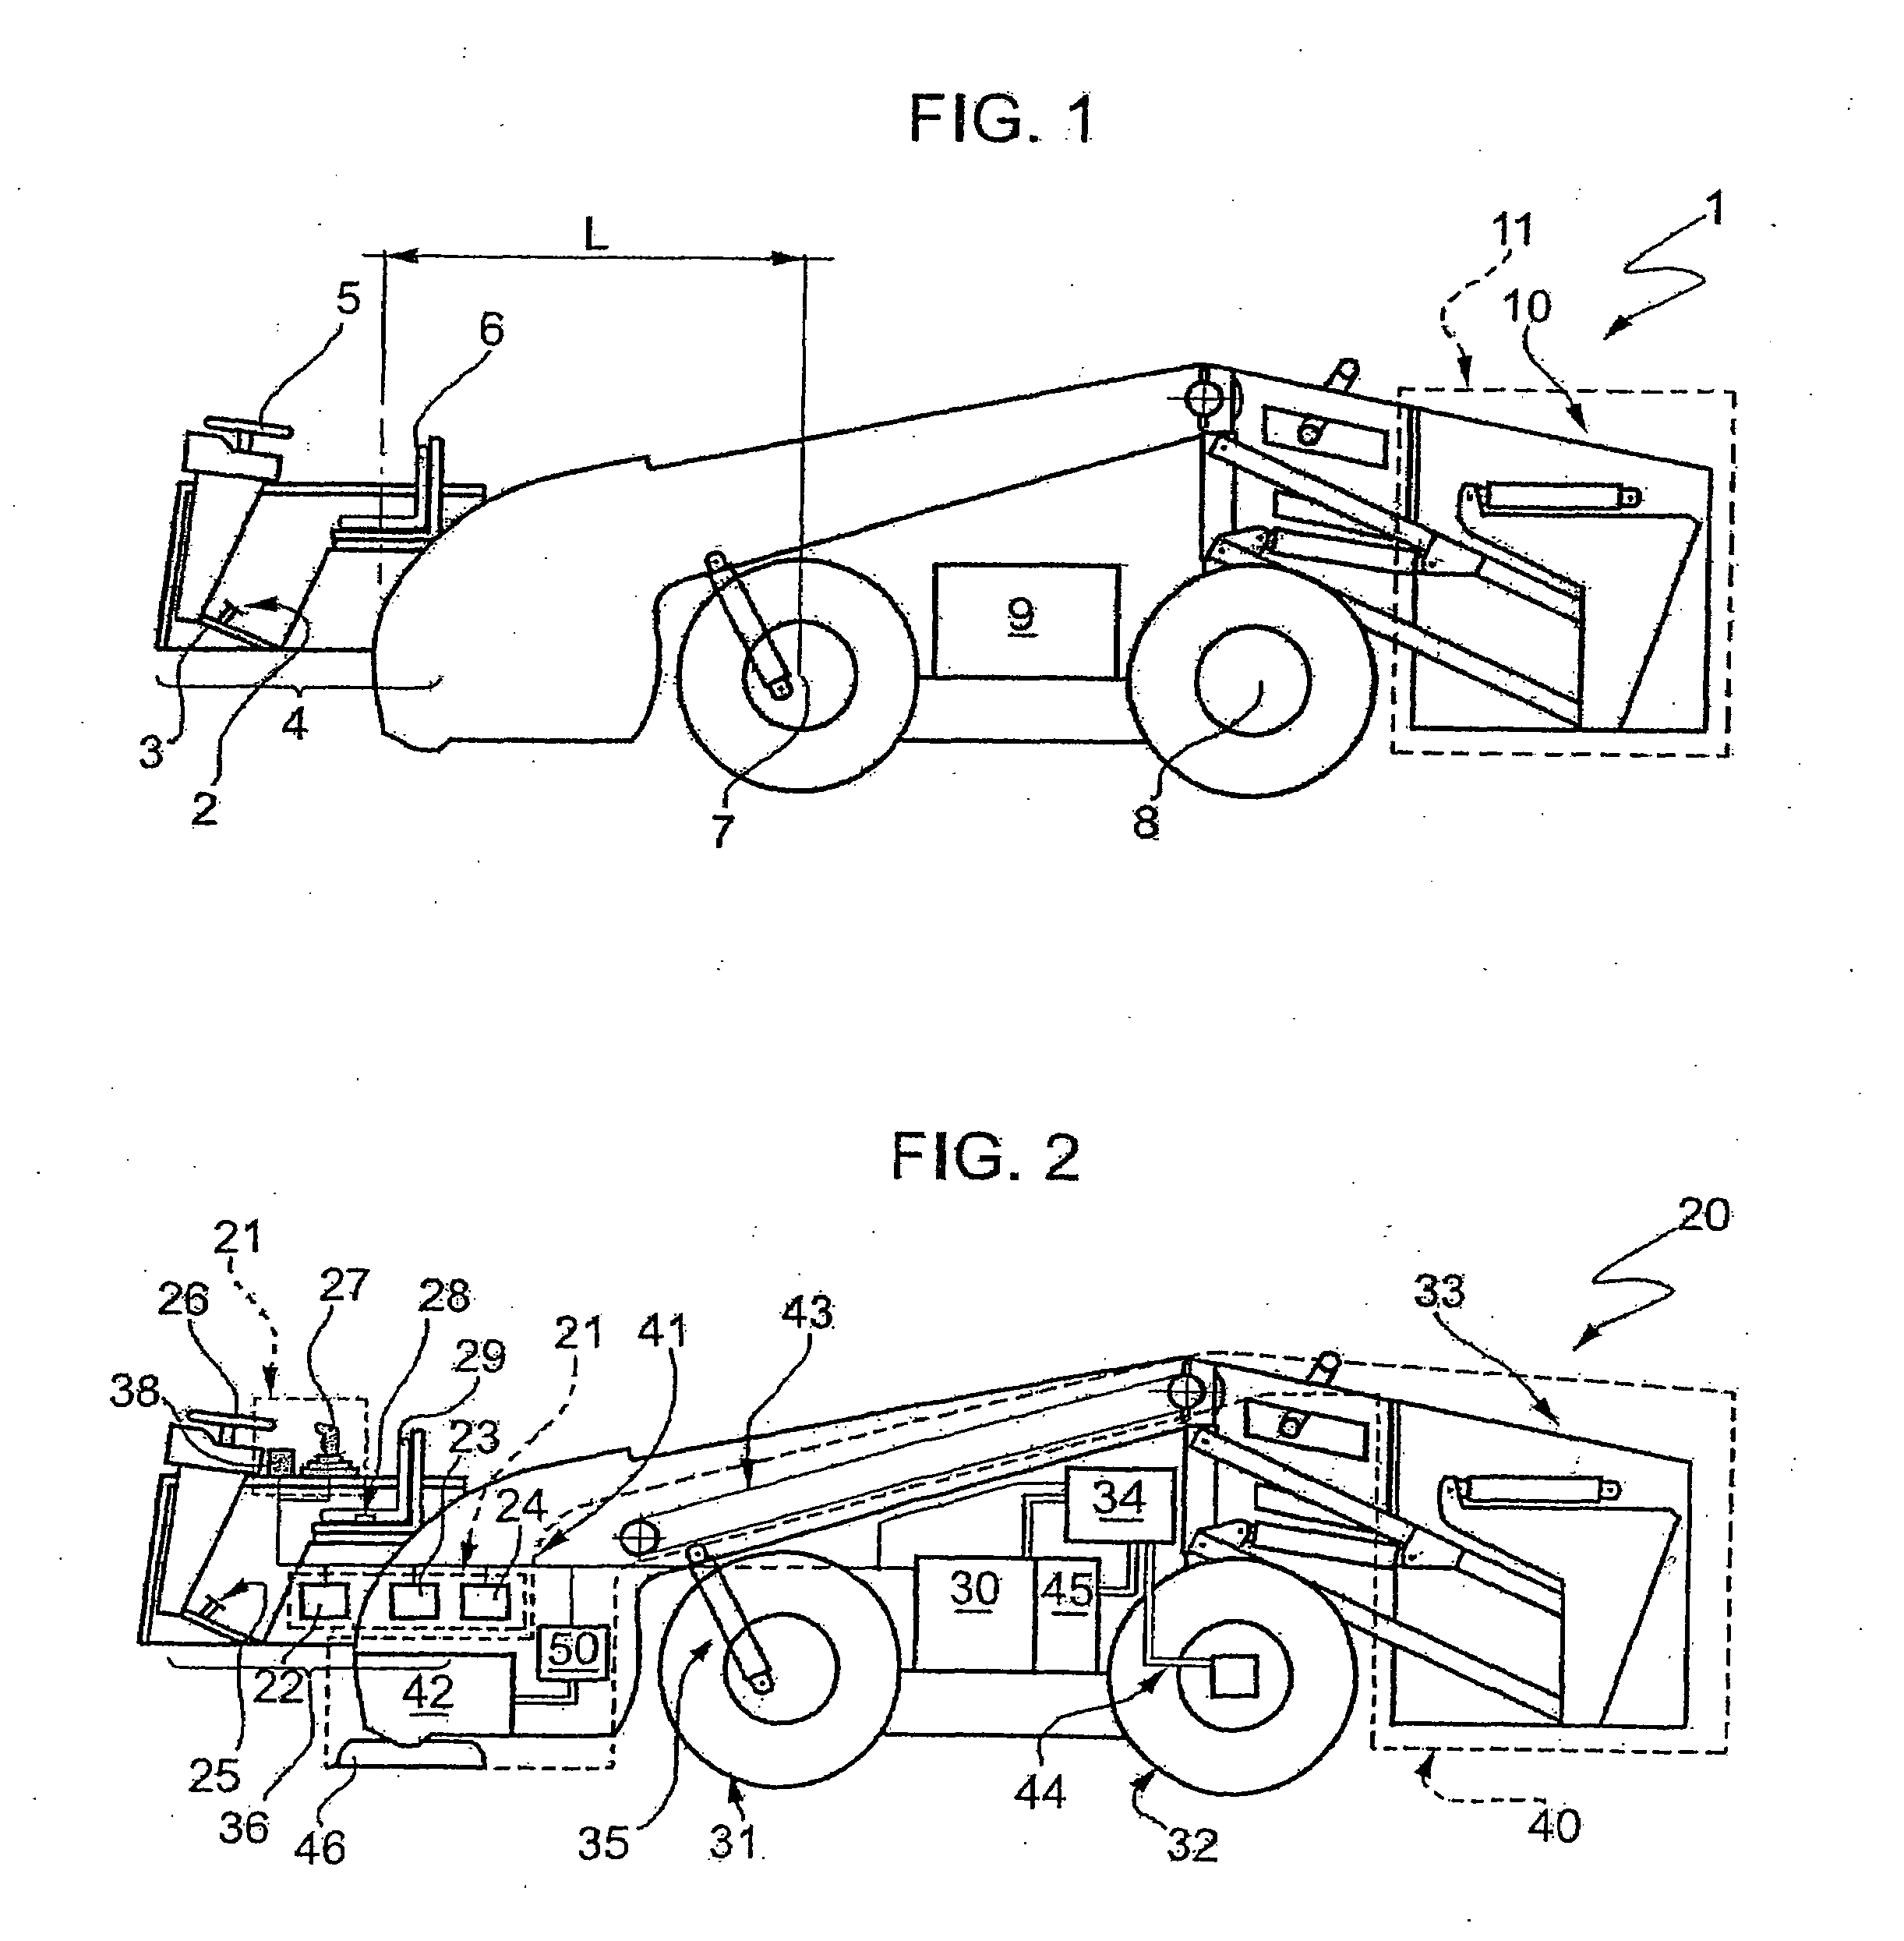 Work Vehicle With A Joystick Command And Control System